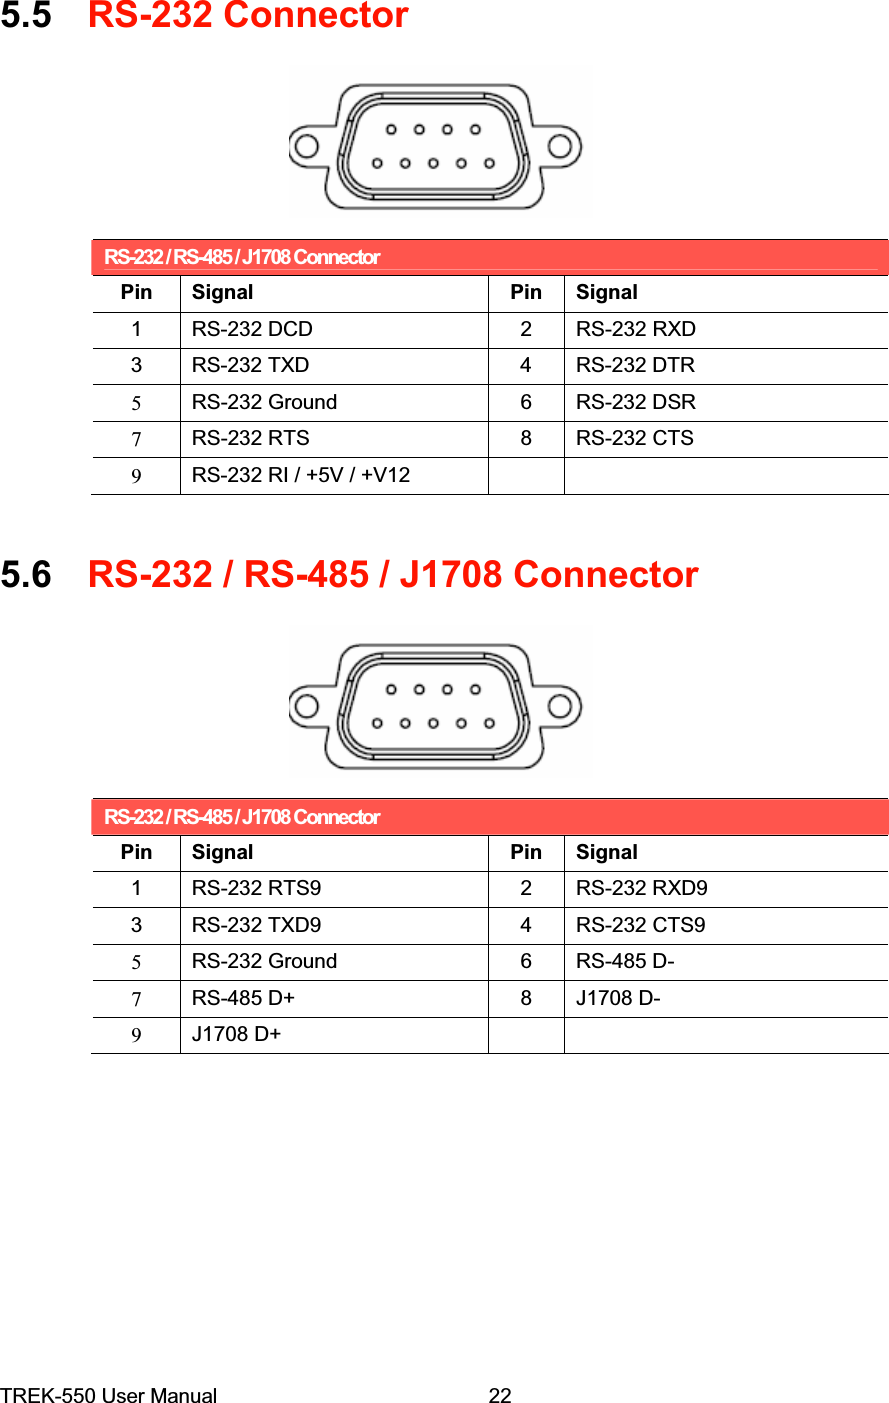 5.5RS-232 Connector RS-232 / RS-485 / J1708 Connector Pin Signal Pin Signal1  RS-232 DCD  2  RS-232 RXD 3  RS-232 TXD  4  RS-232 DTR 5RS-232 Ground  6  RS-232 DSR 7RS-232 RTS  8  RS-232 CTS 9RS-232 RI / +5V / +V12     5.6RS-232 / RS-485 / J1708 ConnectorRS-232 / RS-485 / J1708 Connector Pin Signal Pin Signal1  RS-232 RTS9  2  RS-232 RXD9 3  RS-232 TXD9  4  RS-232 CTS9 5RS-232 Ground  6  RS-485 D- 7RS-485 D+  8  J1708 D- 9J1708 D+     TREK-550 User Manual22